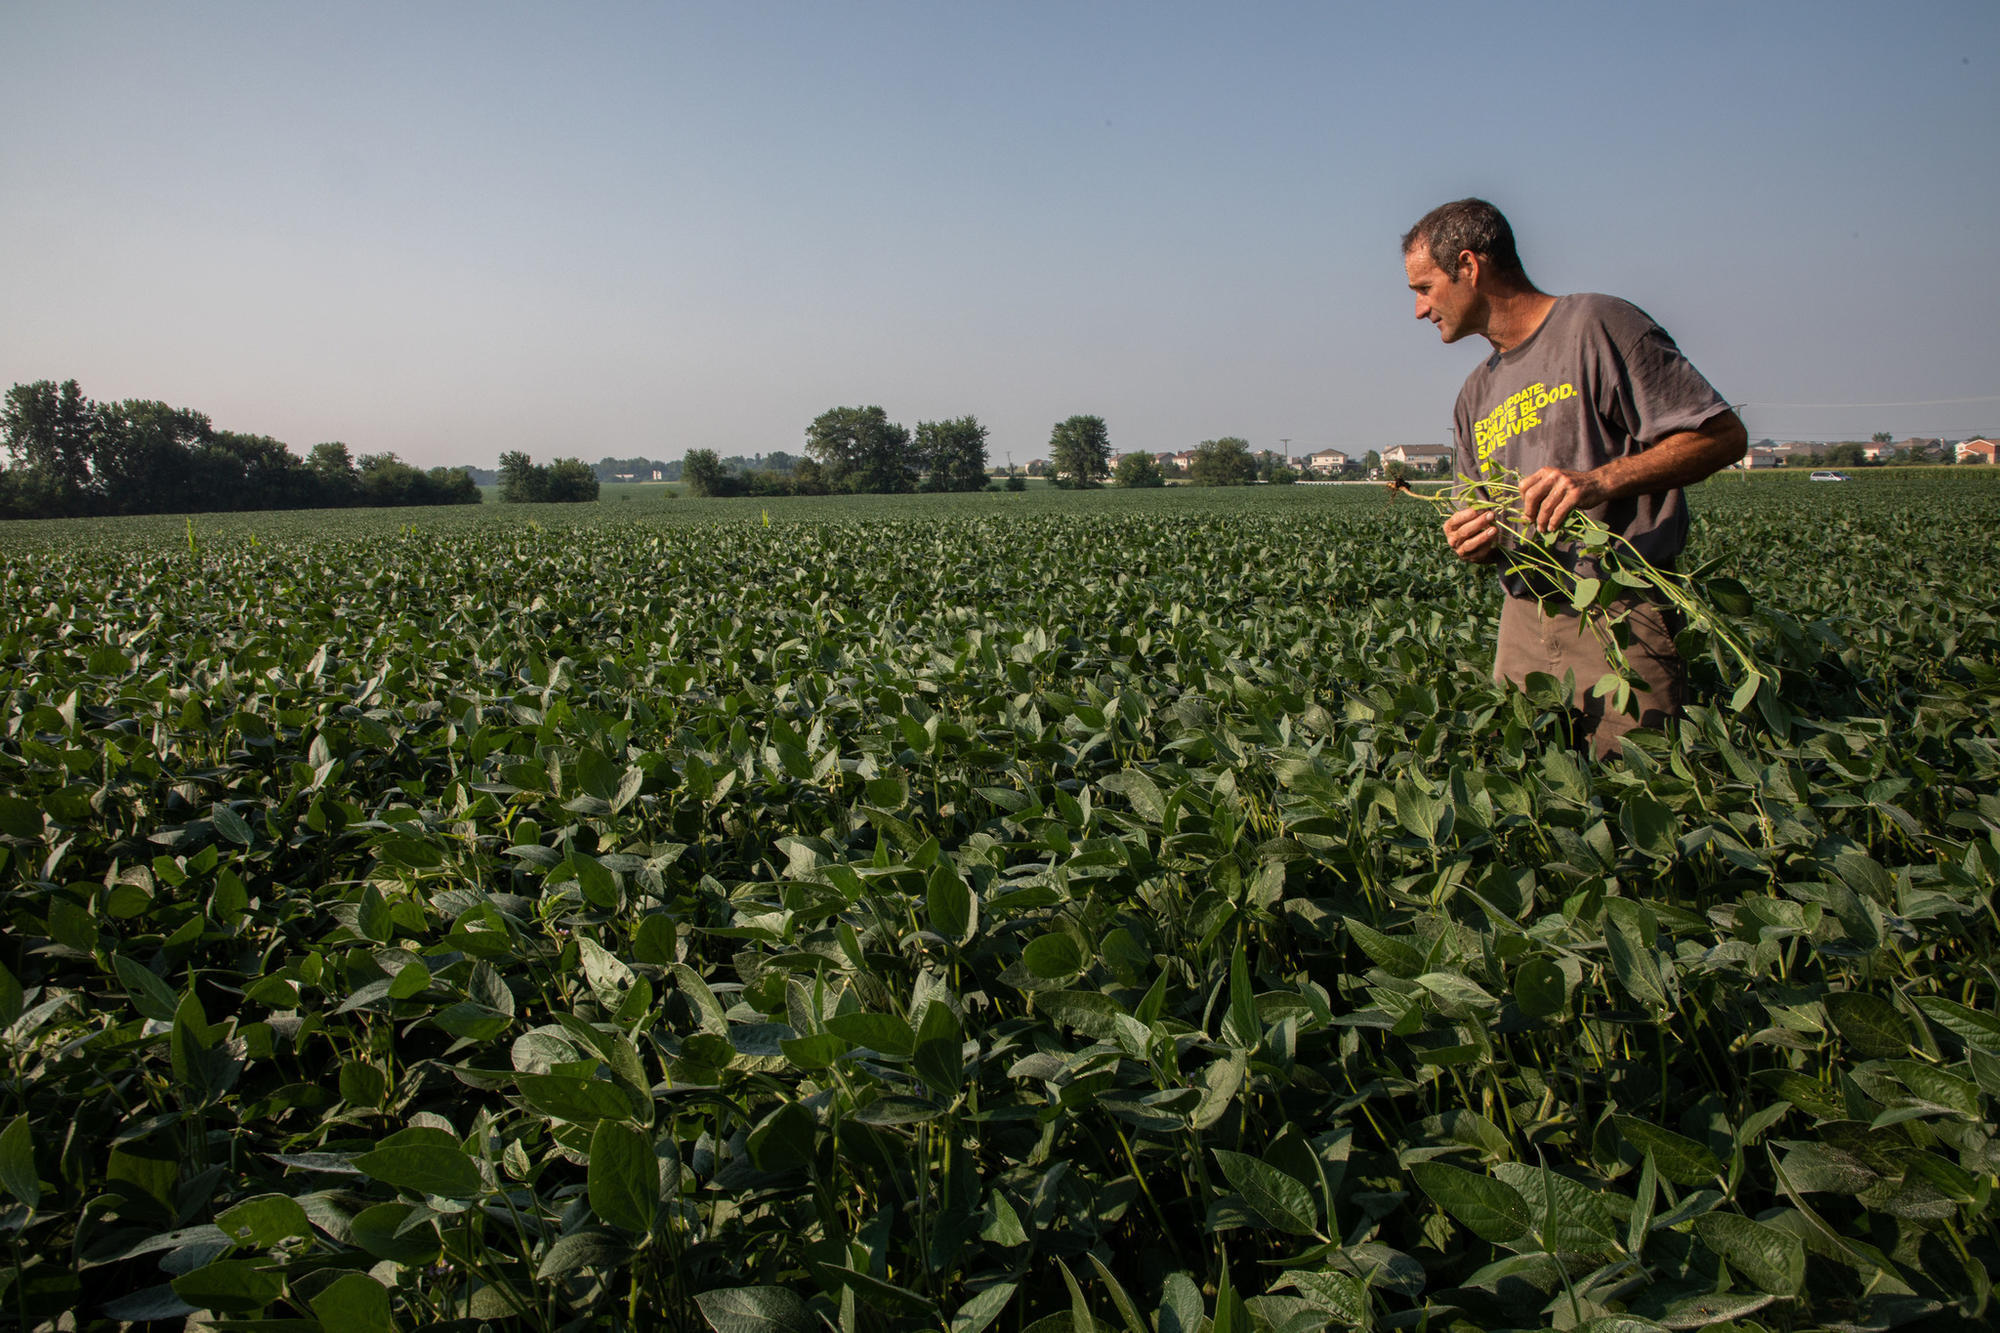 Illinois farmers welcome $12 billion in aid, but prefer trade: 'There’s